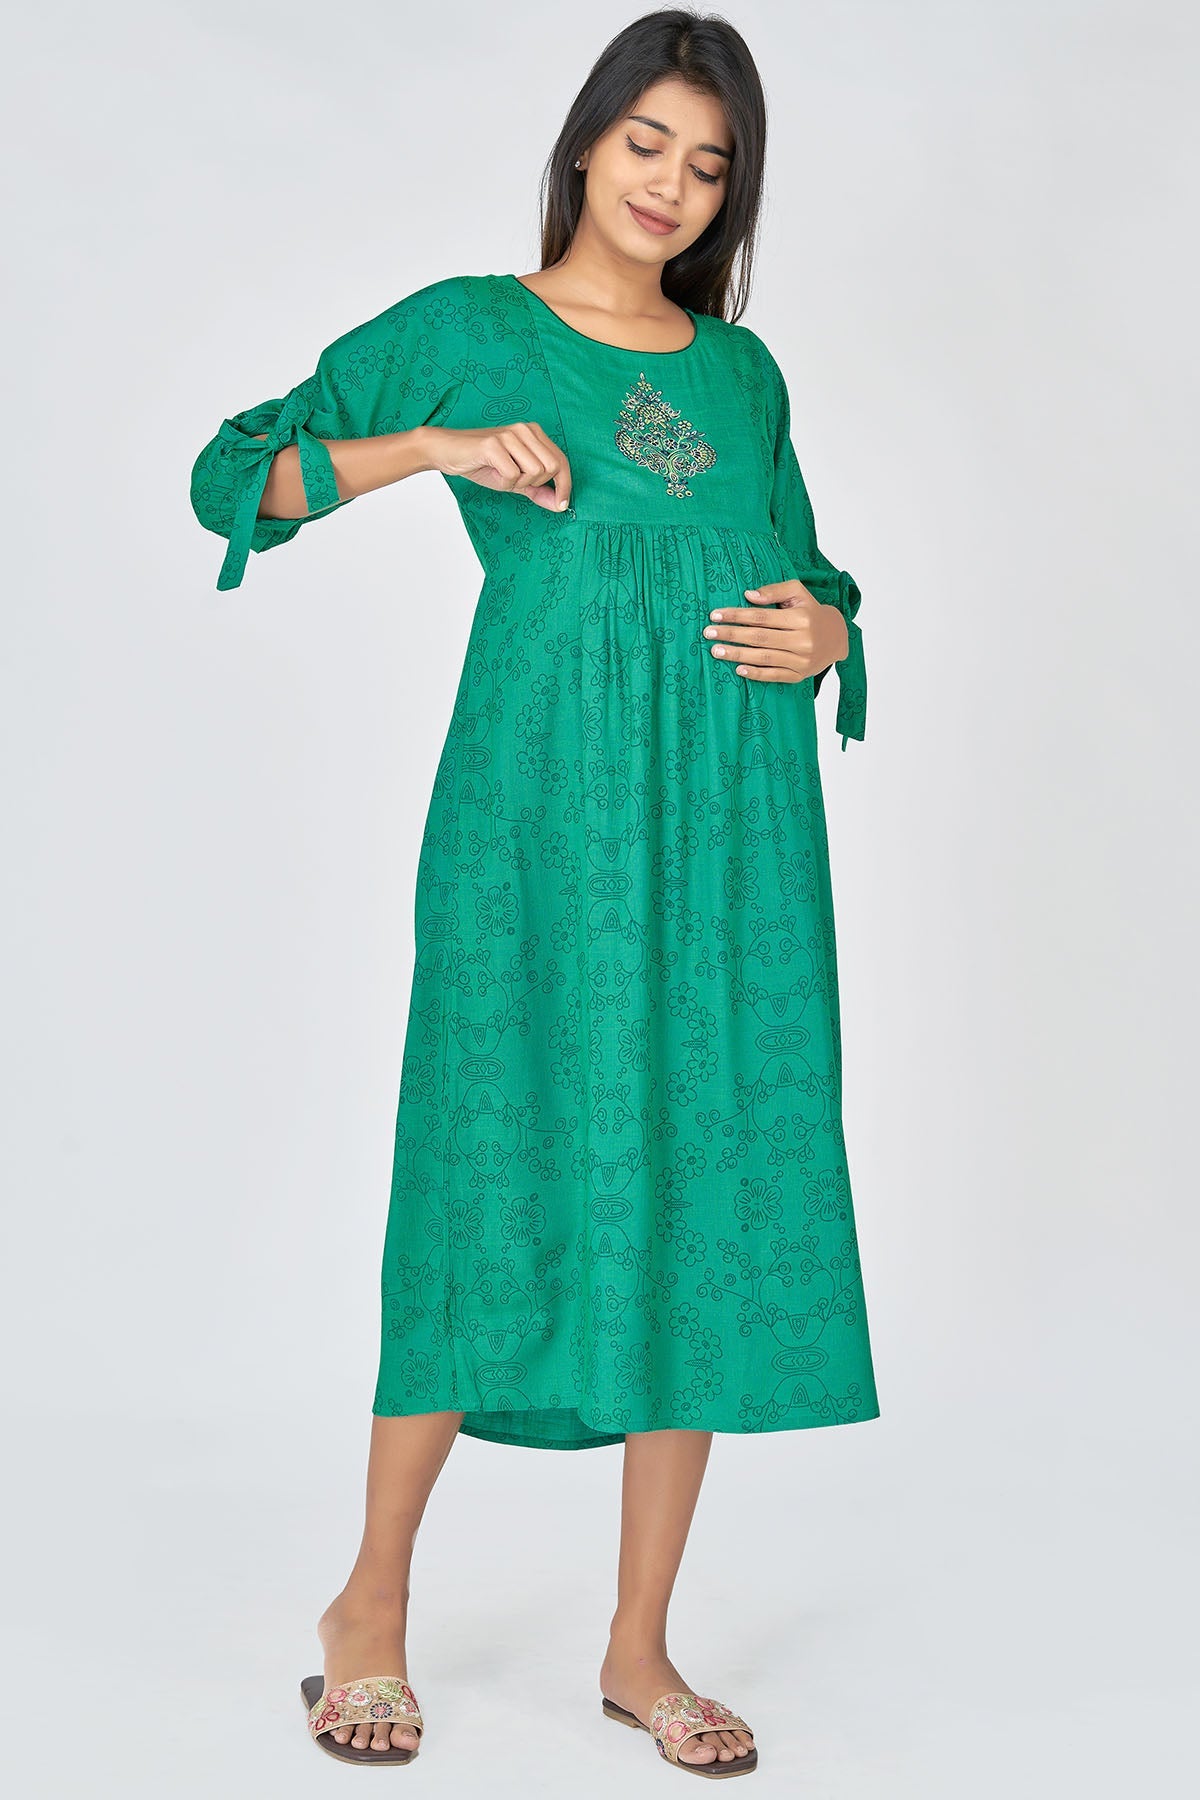 Floral Printed & Mirror Embroidered Women's Maternity Kurta - Green